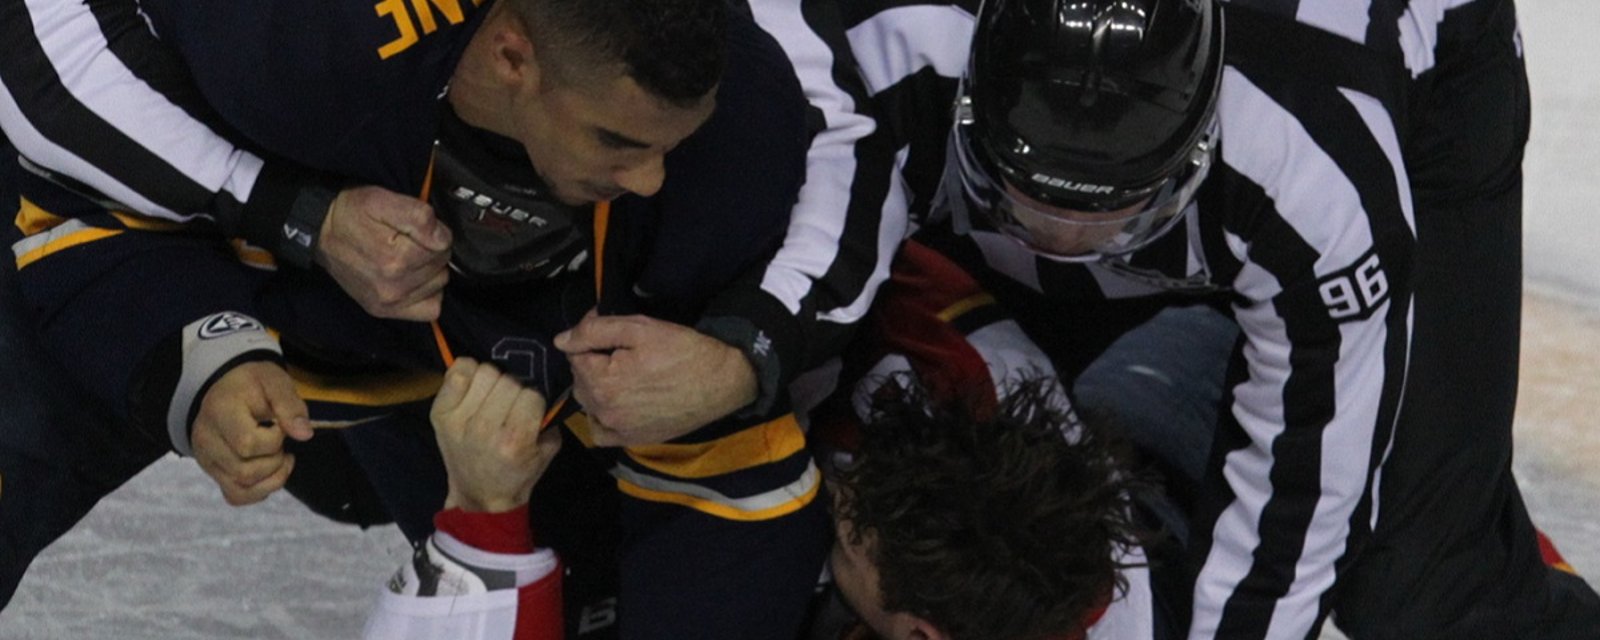 The NHL may be secretly moving towards a ban on fighting.